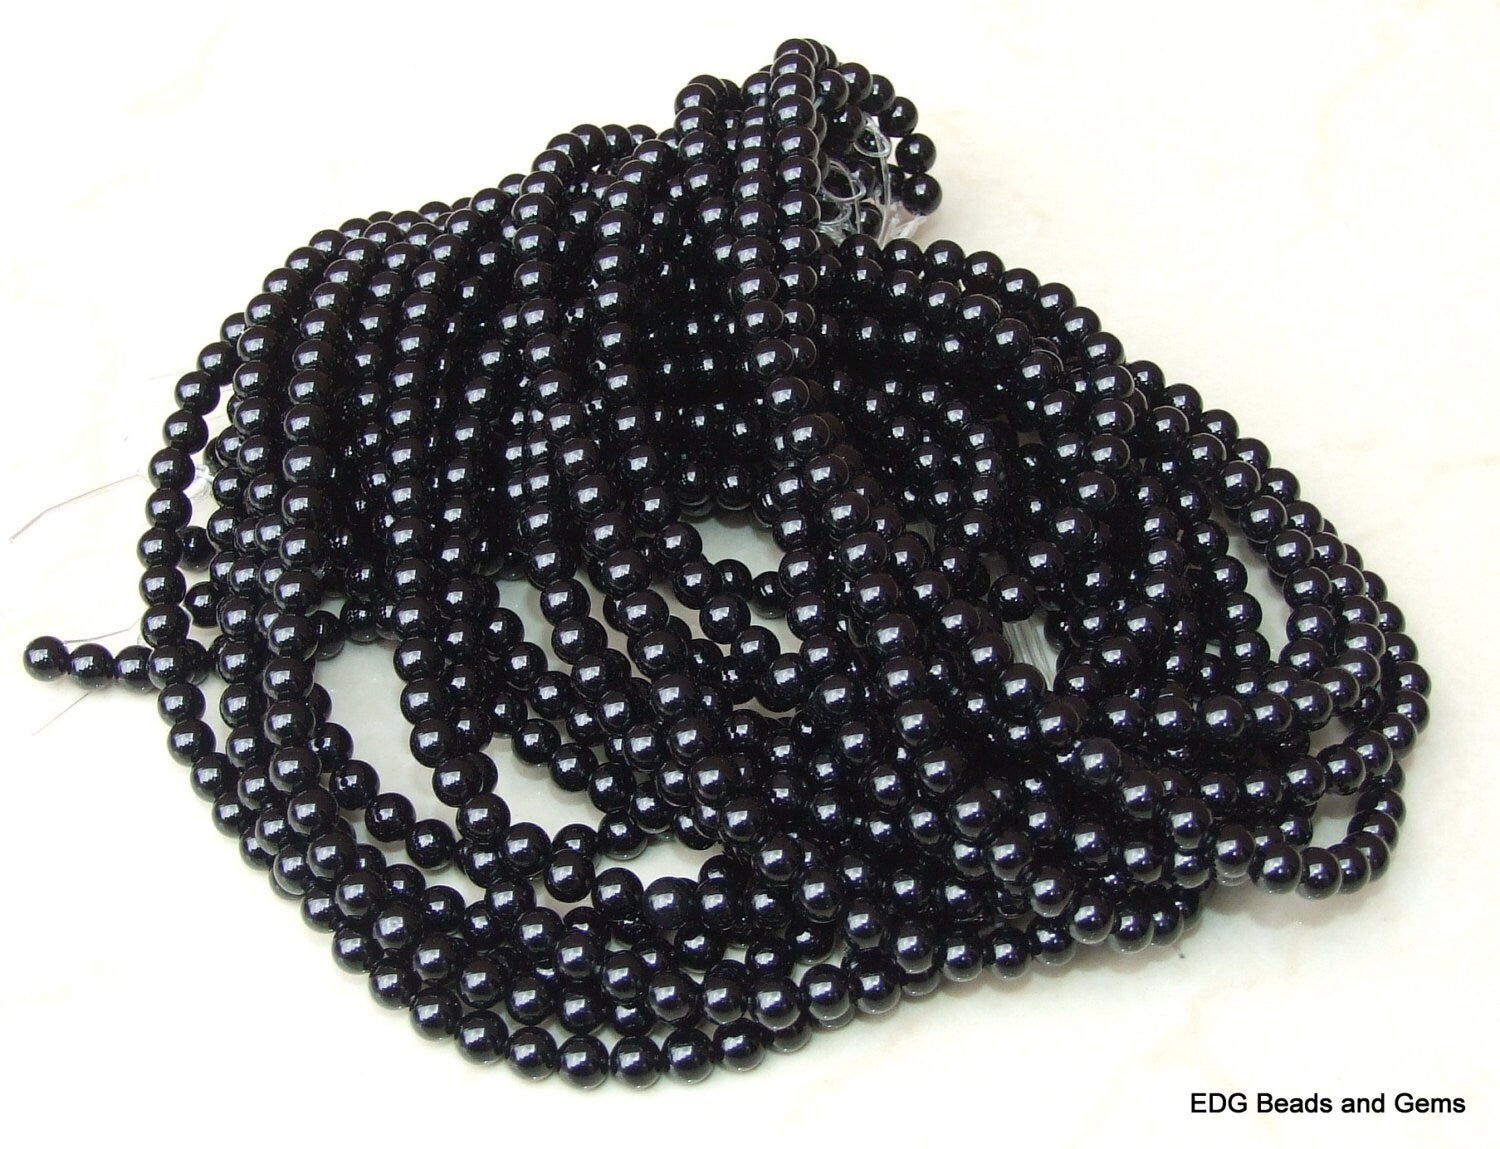 Black Agate Beads.  Round Polished Agate Beads - 6mm - 14 inch Strand